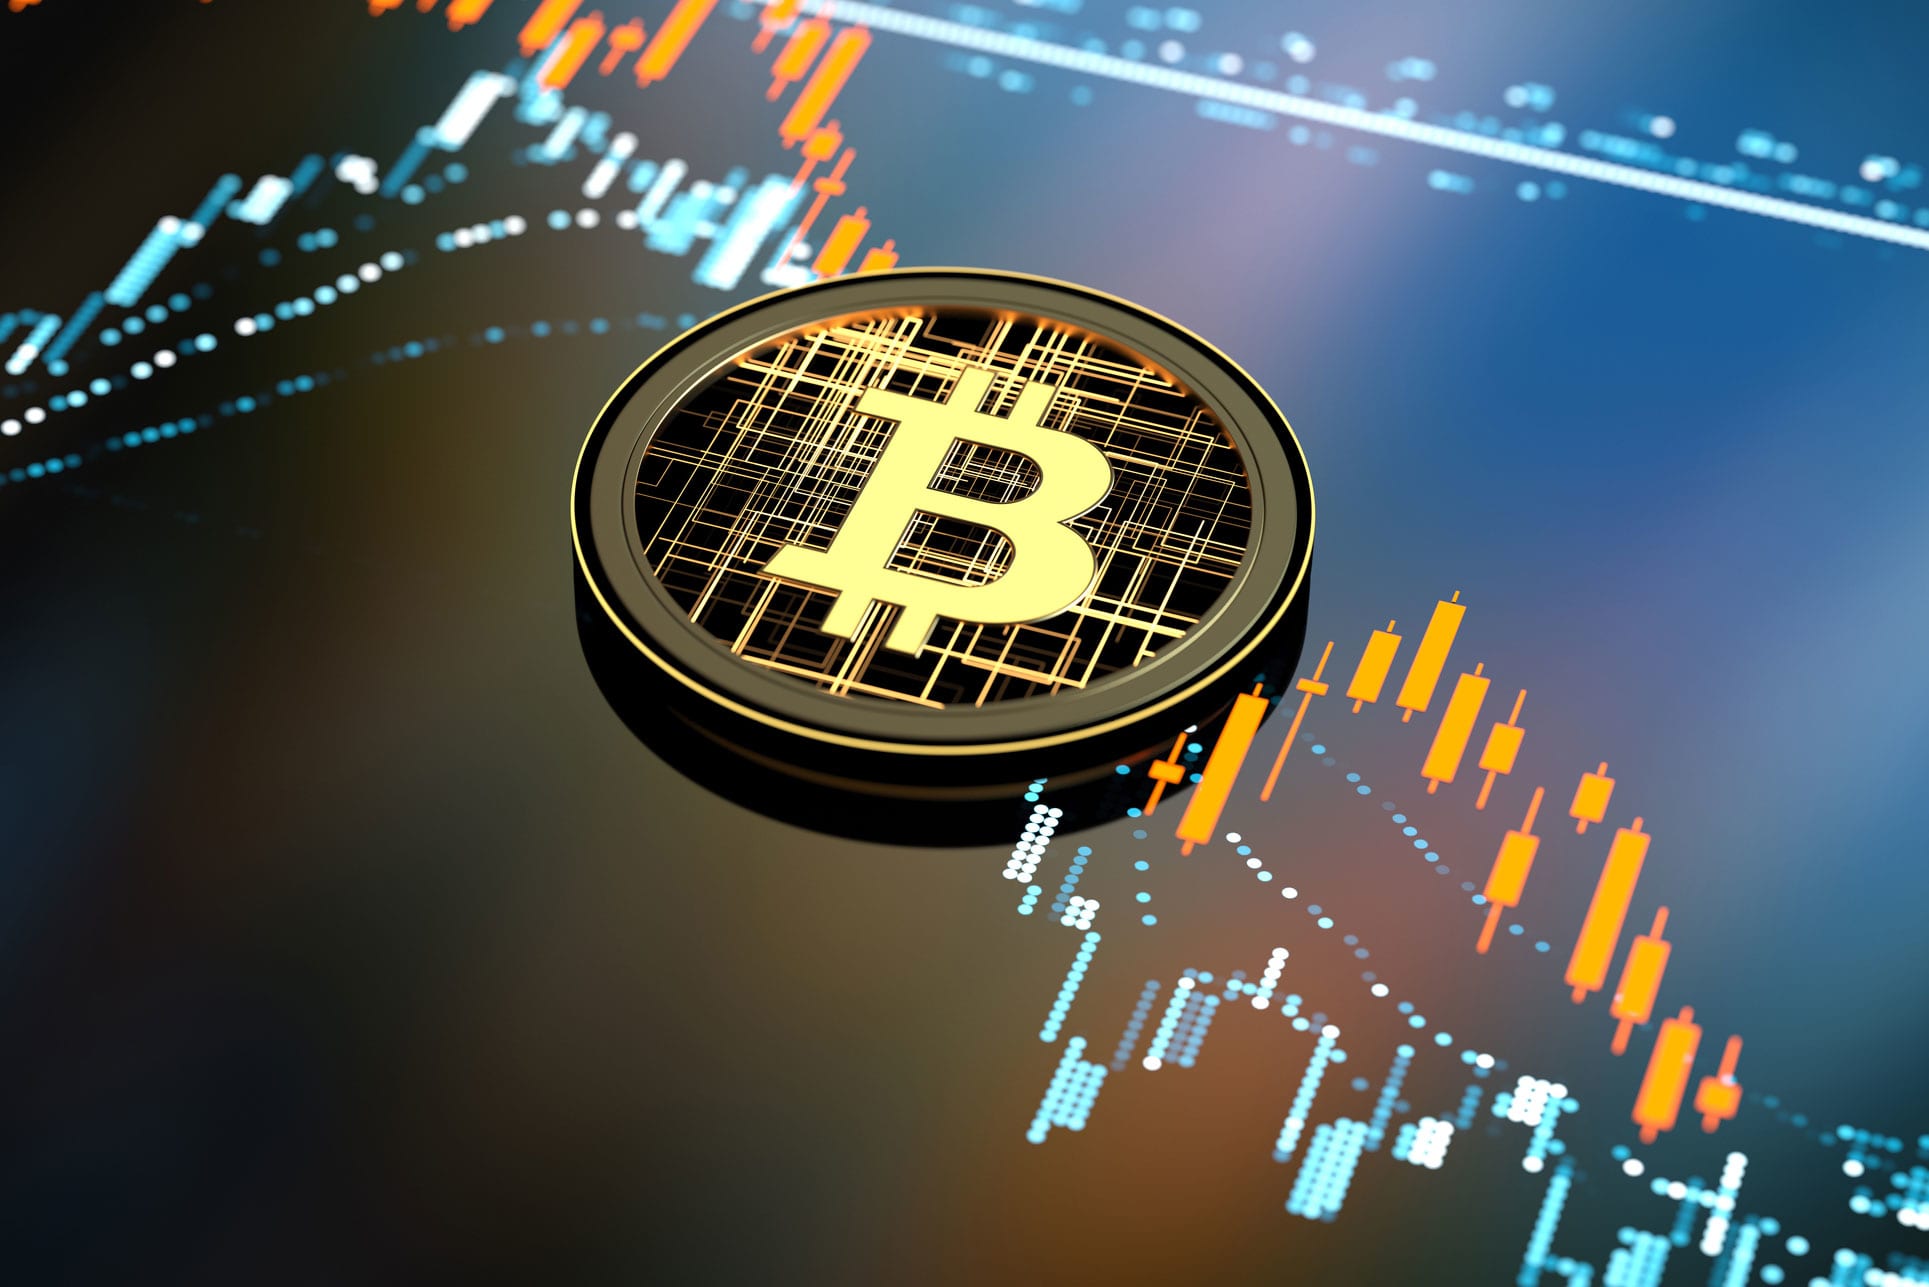 Bitcoin holds steady below $50,000 in volatile weekend trading